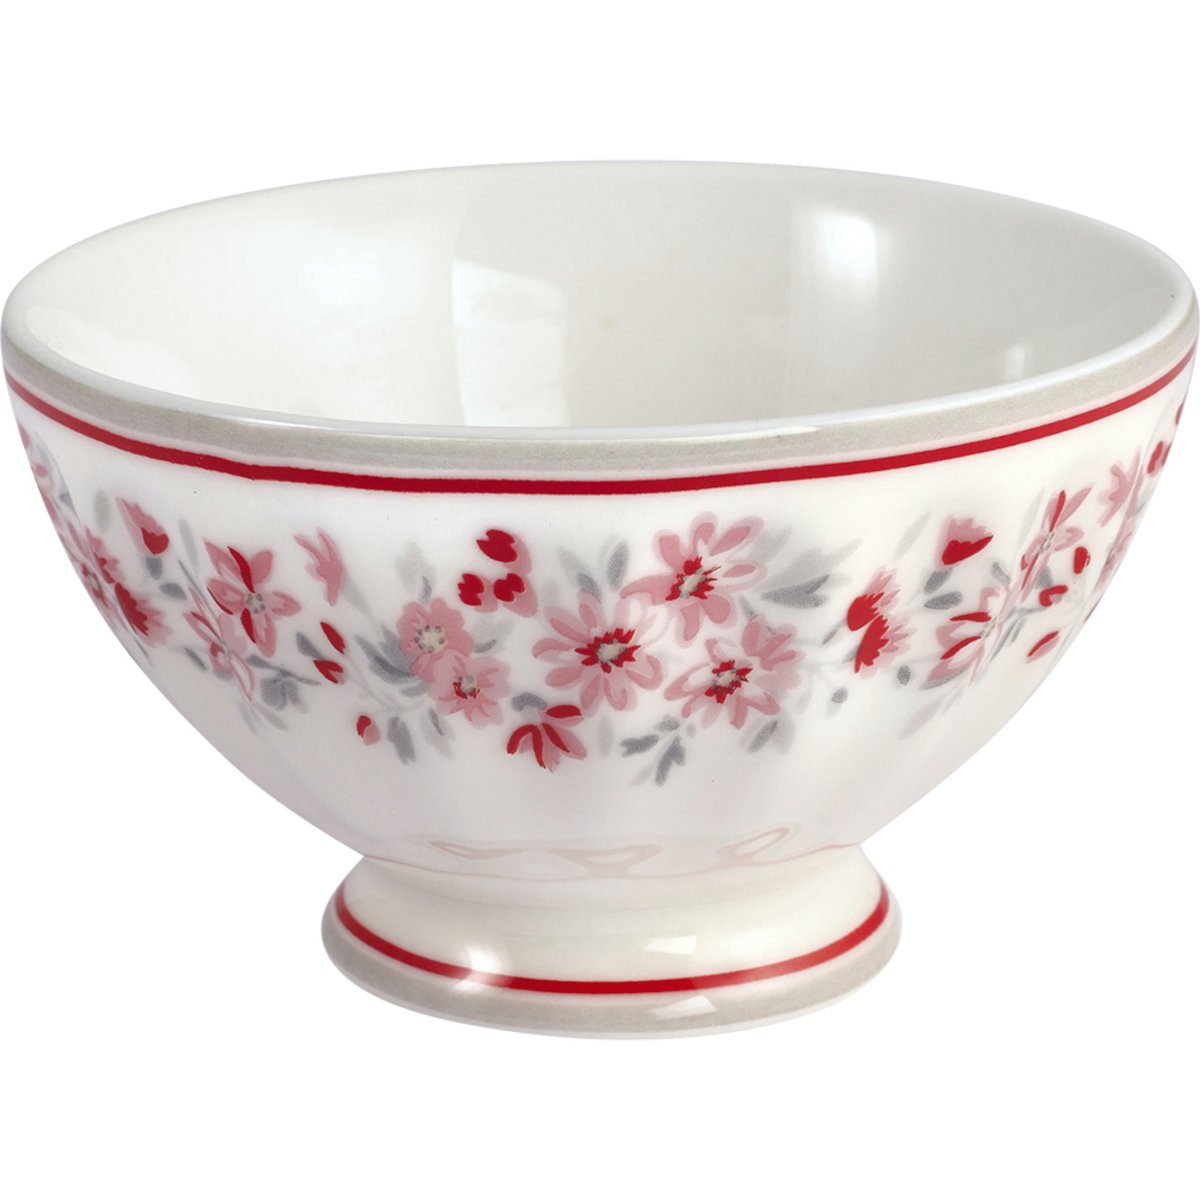 Greengate Schale Emberly French Bowl weiss 0,18l